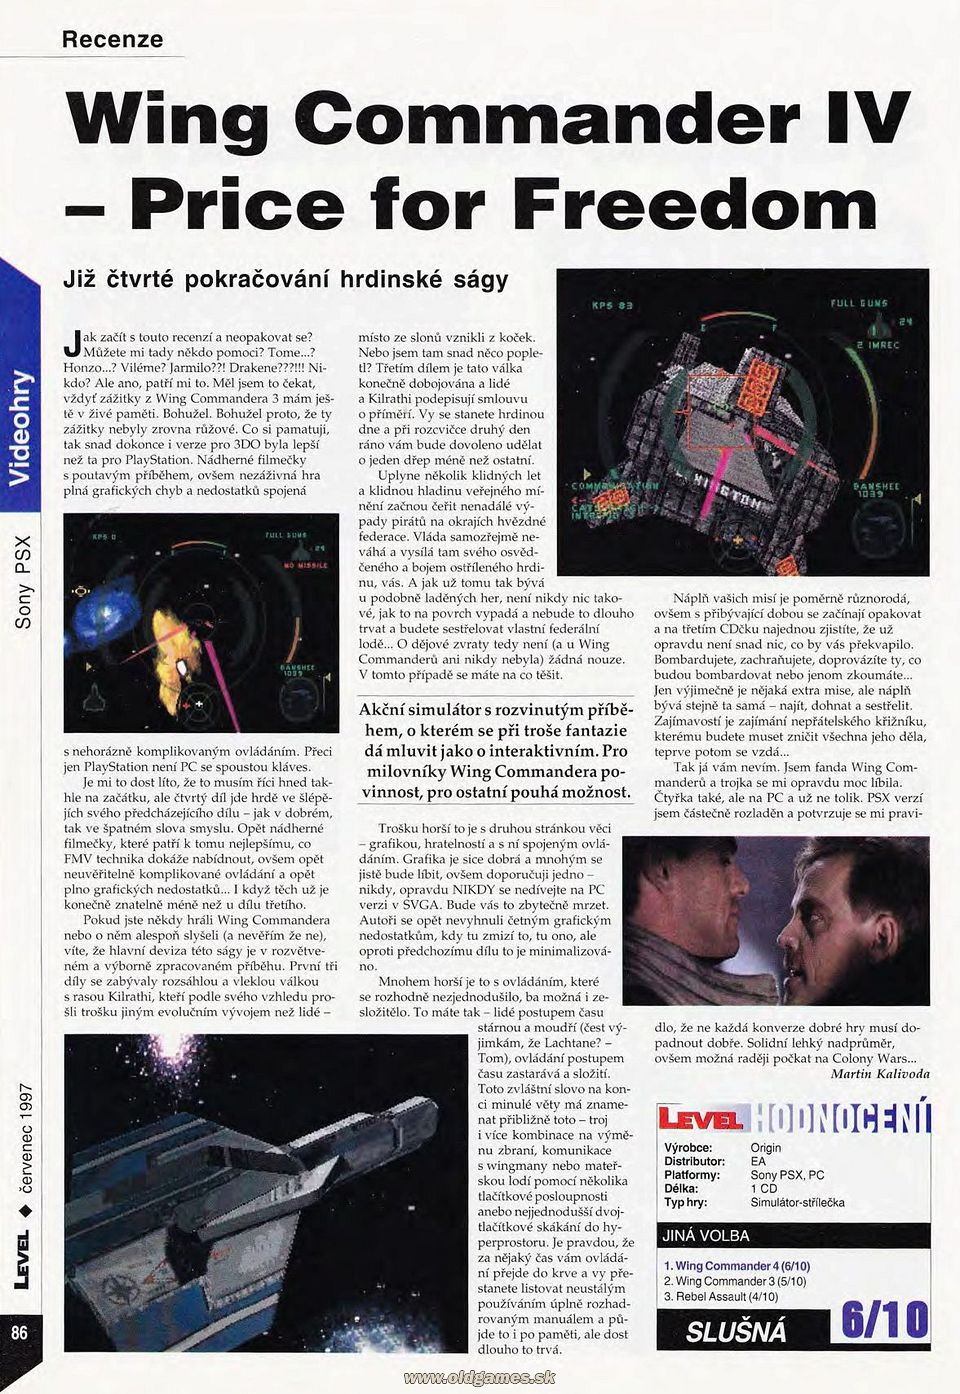 Wing Commander IV - Price for Freedom